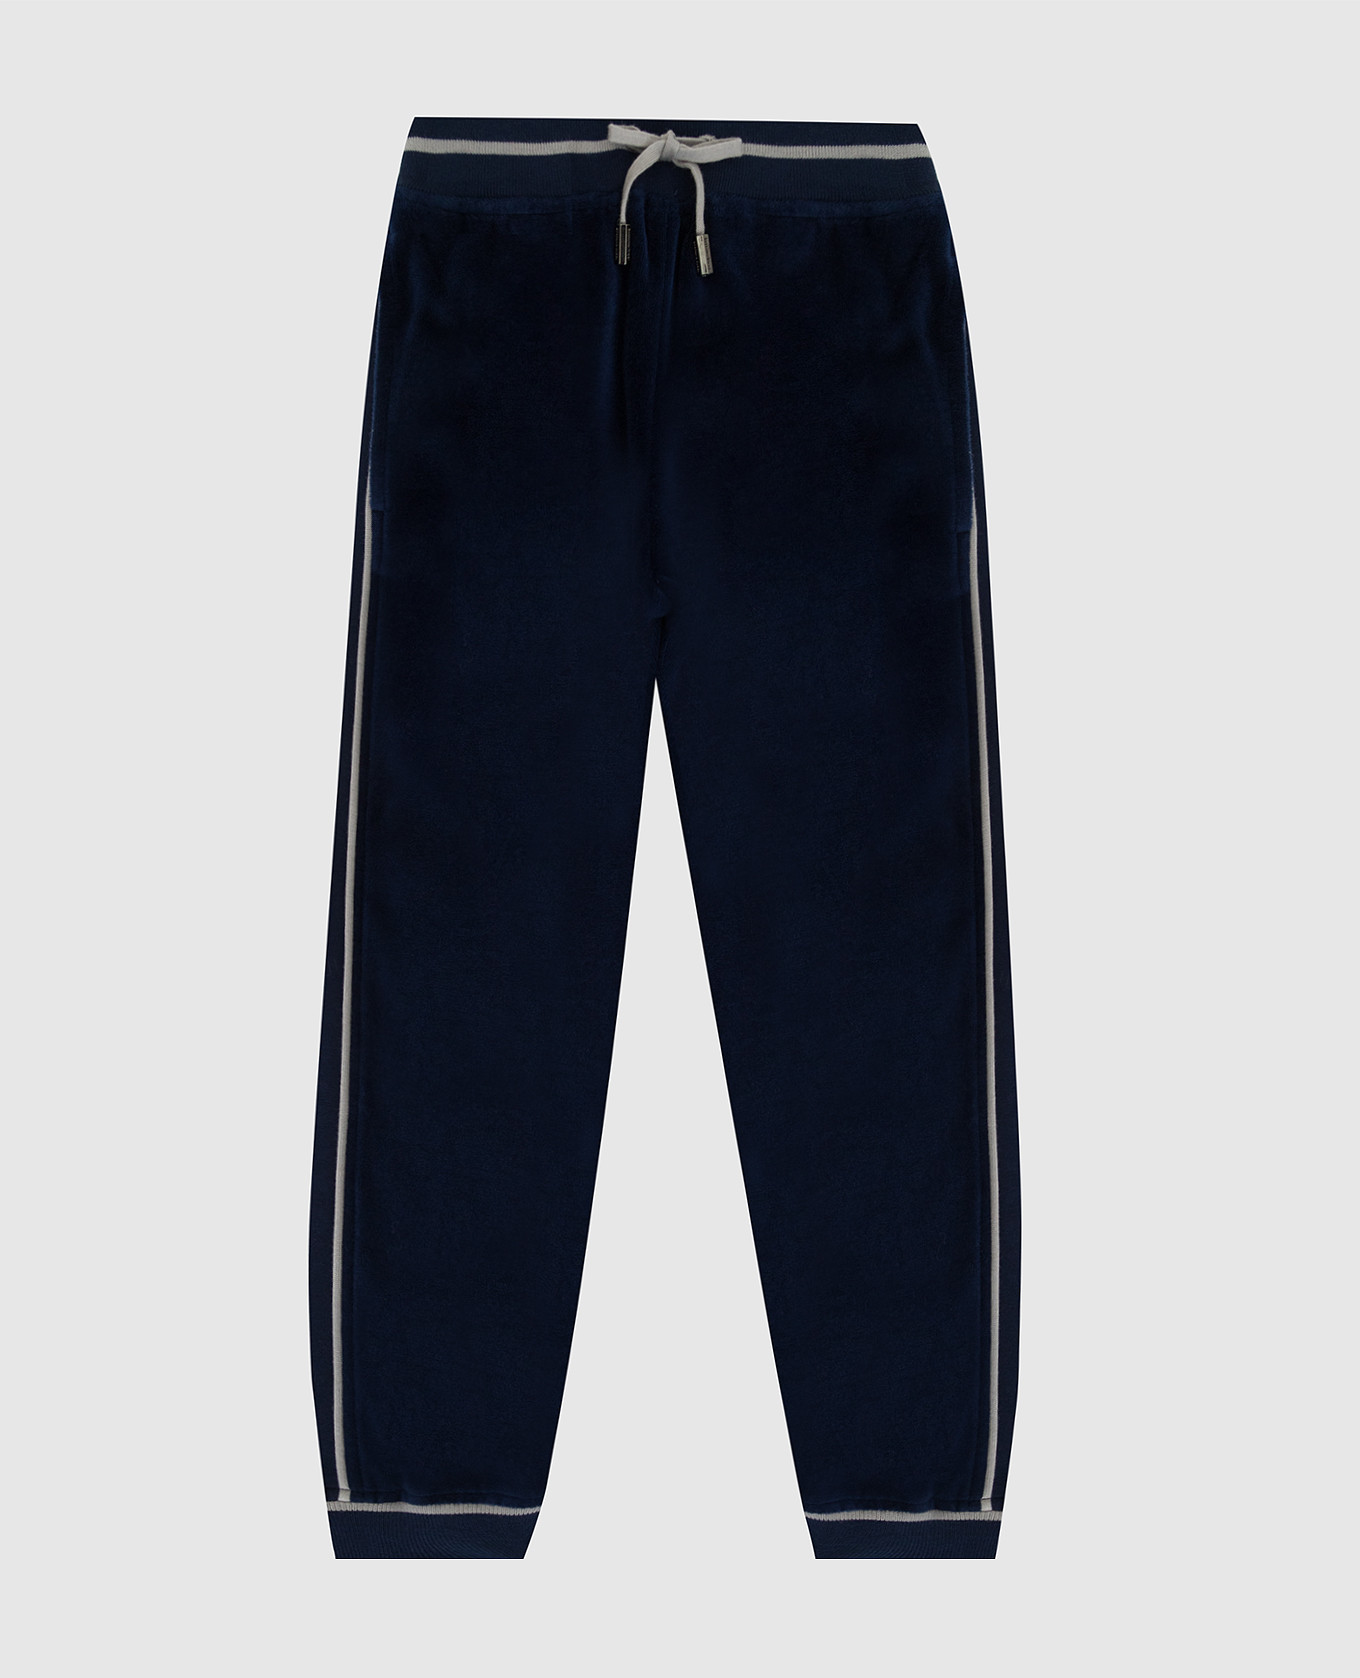 Children's corduroy joggers with stripes